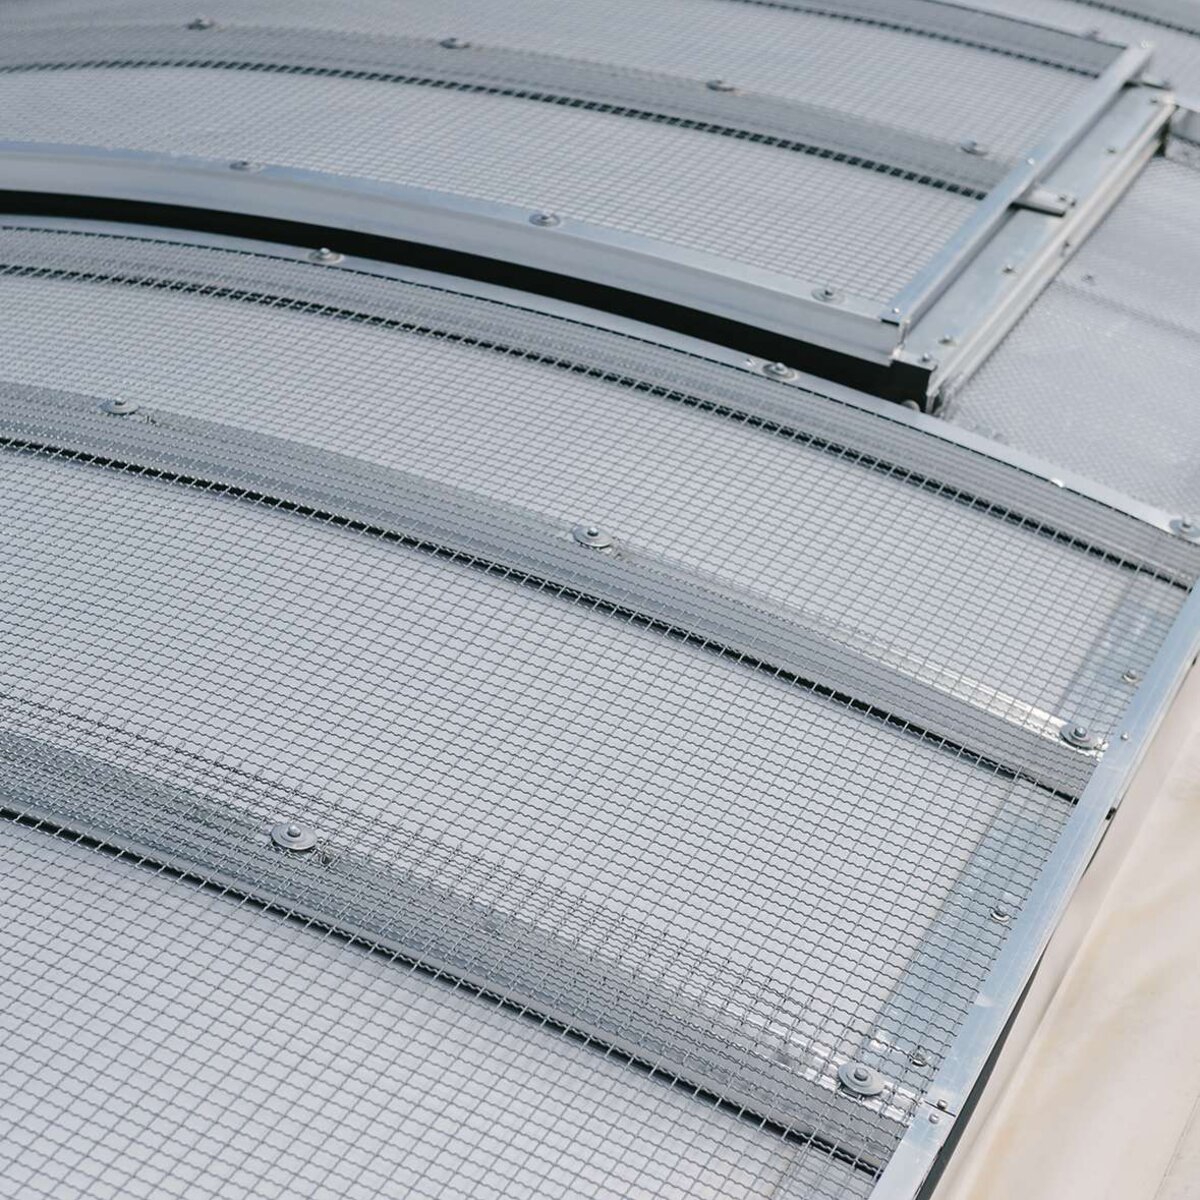 HECO-Schrauben GmbH & Co. KG (Screw manufacturer) | Schramberg • Topline ELS 1.8 continuous rooflight, 4 continuous rooflights 15 m x 2.50 m, hail protection wave grid WG, 4 multi-purpose ventilators, 8 SHEV flaps and 22 PC SHEV rooflights.